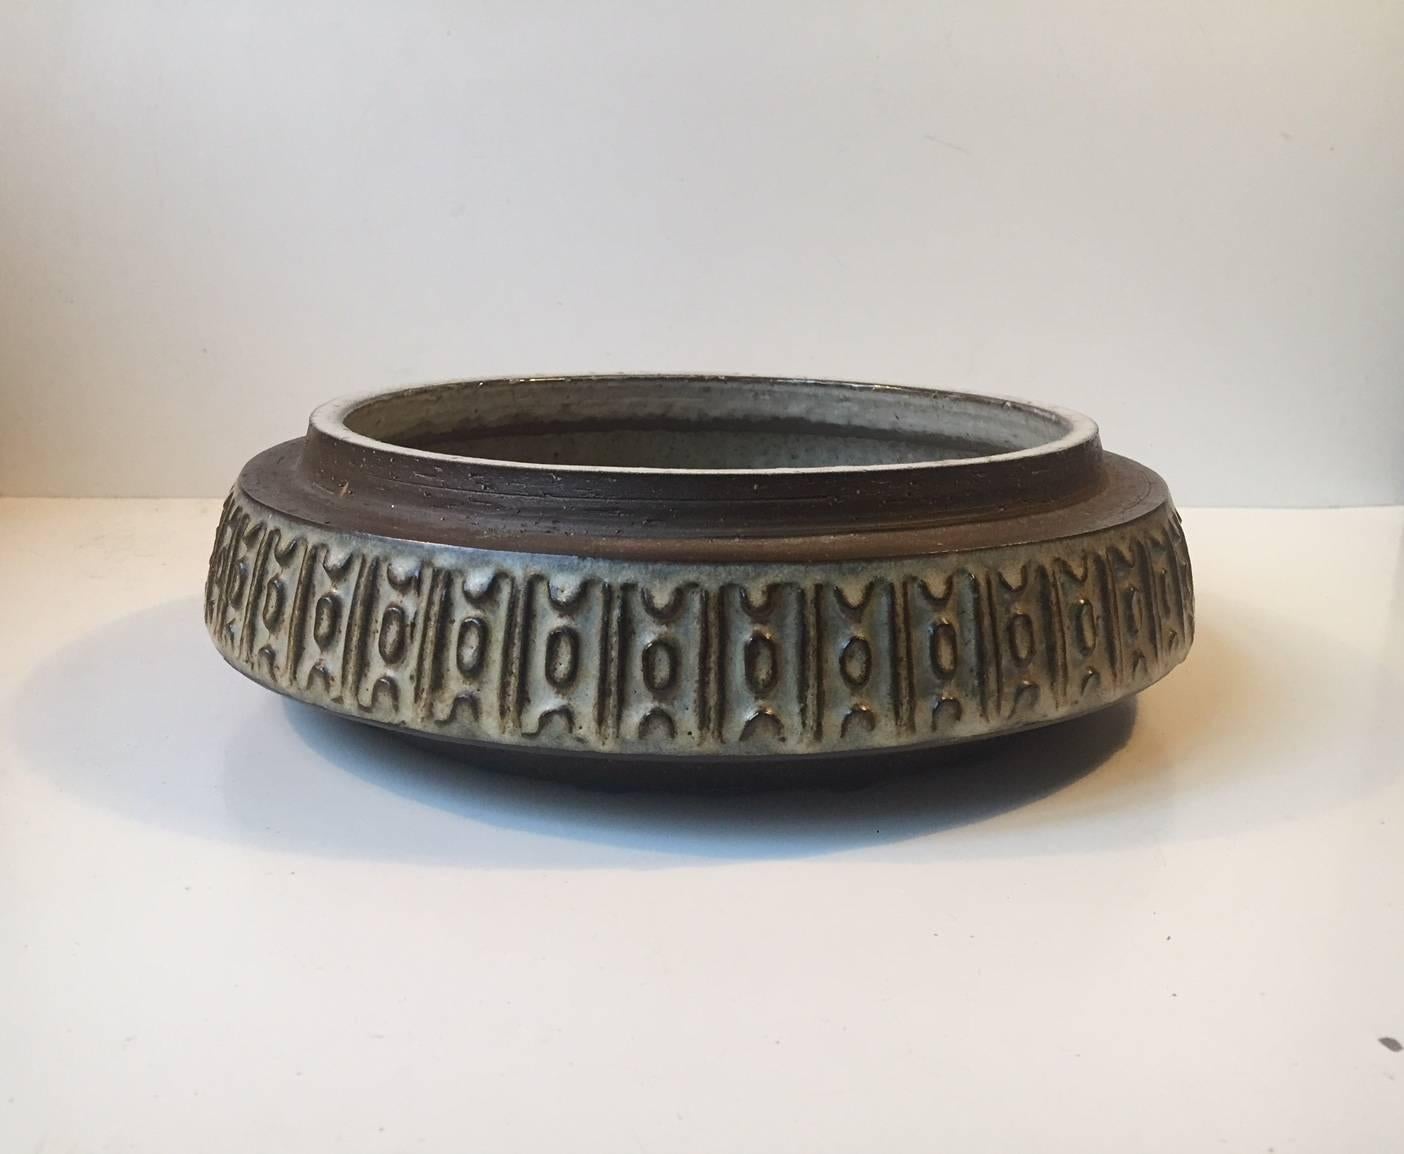 Danish Modern 'Spiral' Stoneware Dish from Michael Andersen, 1960s In Good Condition For Sale In Esbjerg, DK